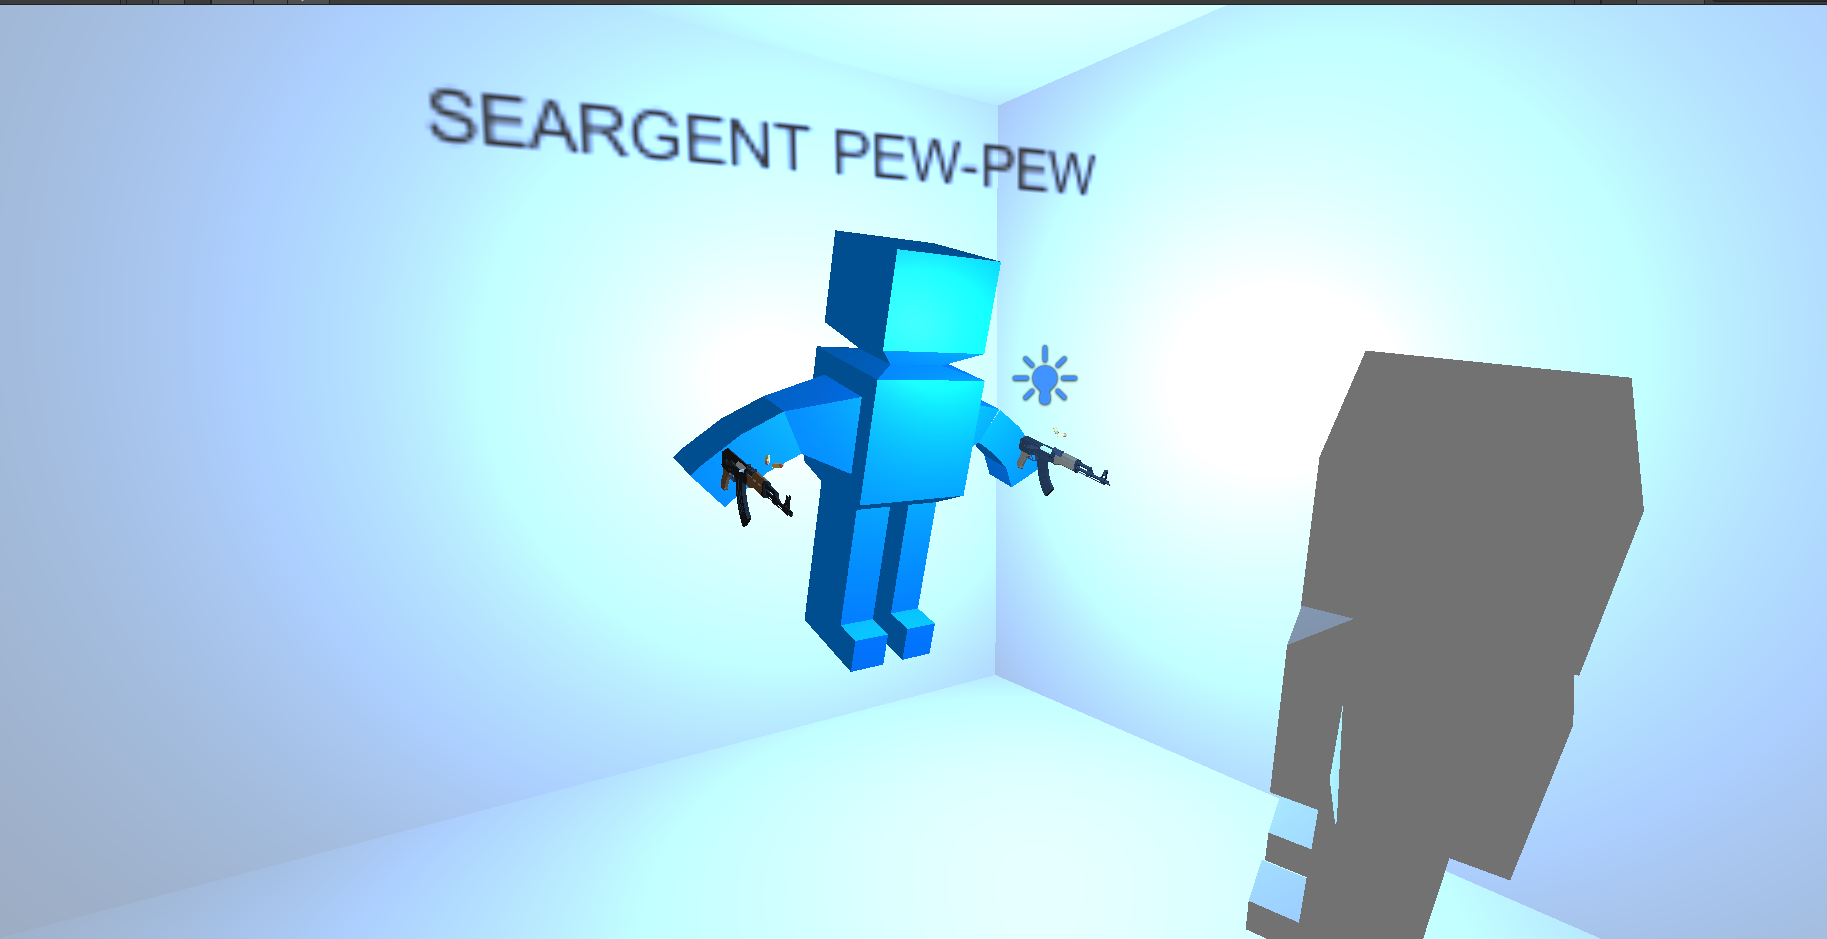 SEARGENT PEW-PEW